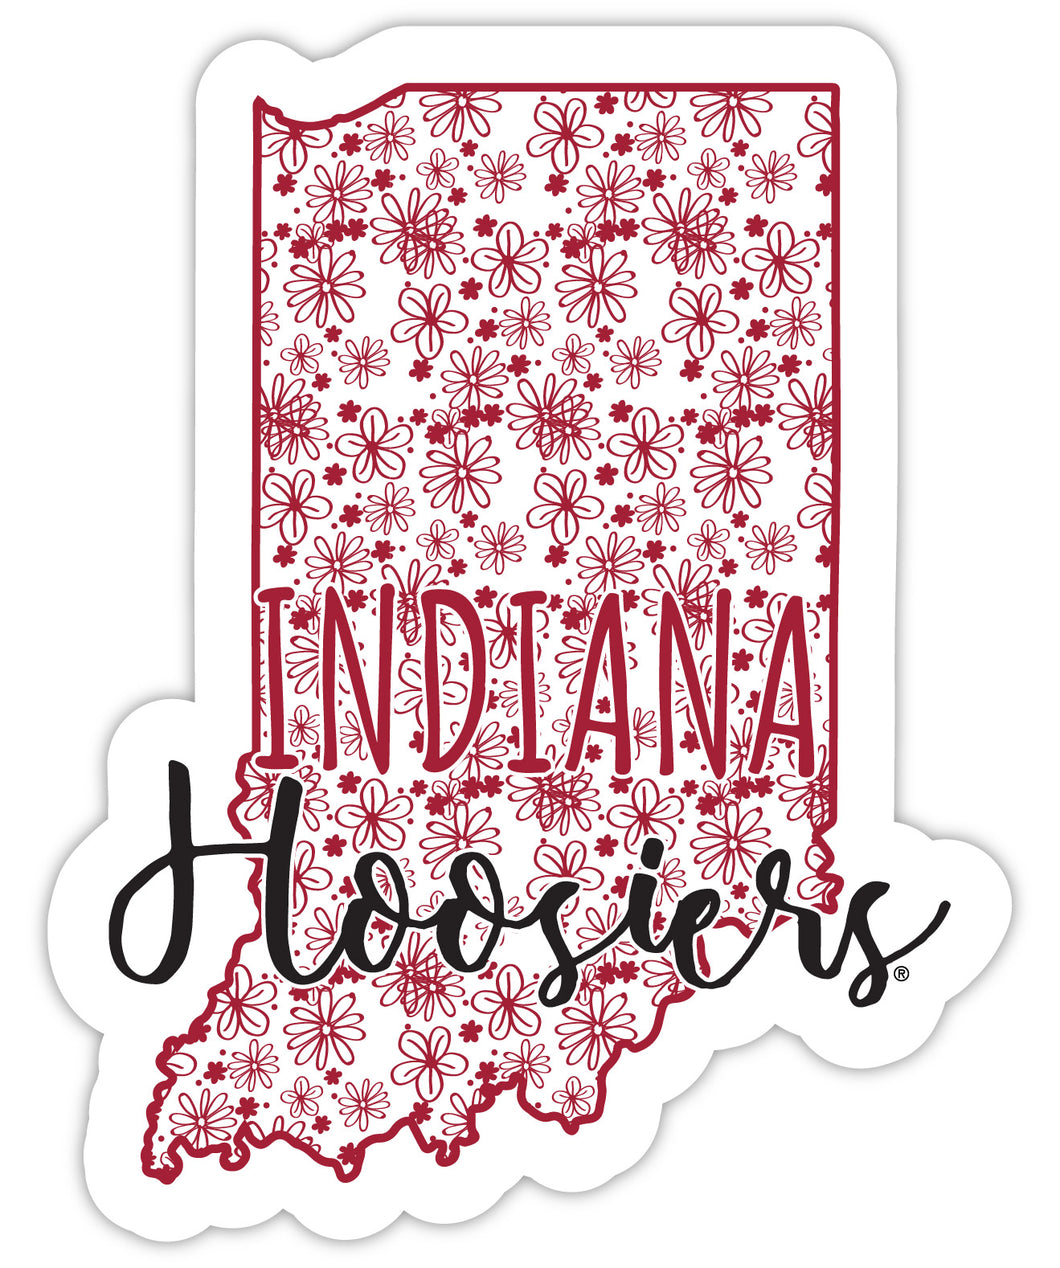 Indiana Hoosiers 4-Inch State Shaped NCAA Floral Love Vinyl Sticker - Blossoming School Spirit Decal